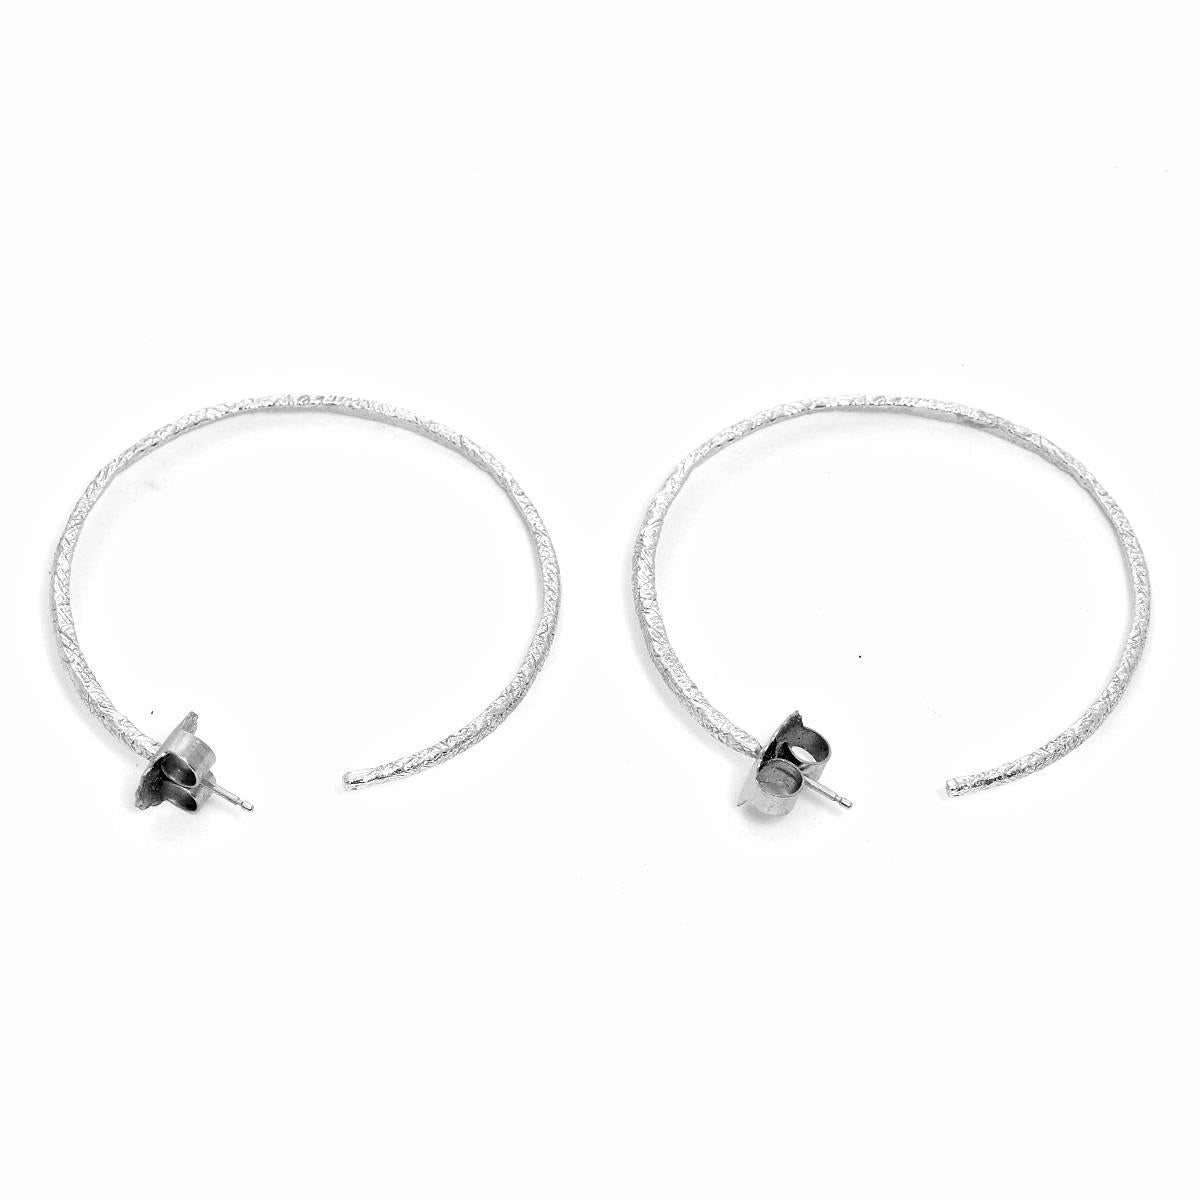 18K White Gold Hammered Earring Hoops - . 1 3/4 in diameter. .2 mm in thickness. Total weight of 7.7 grams. Perfect for an every day look.